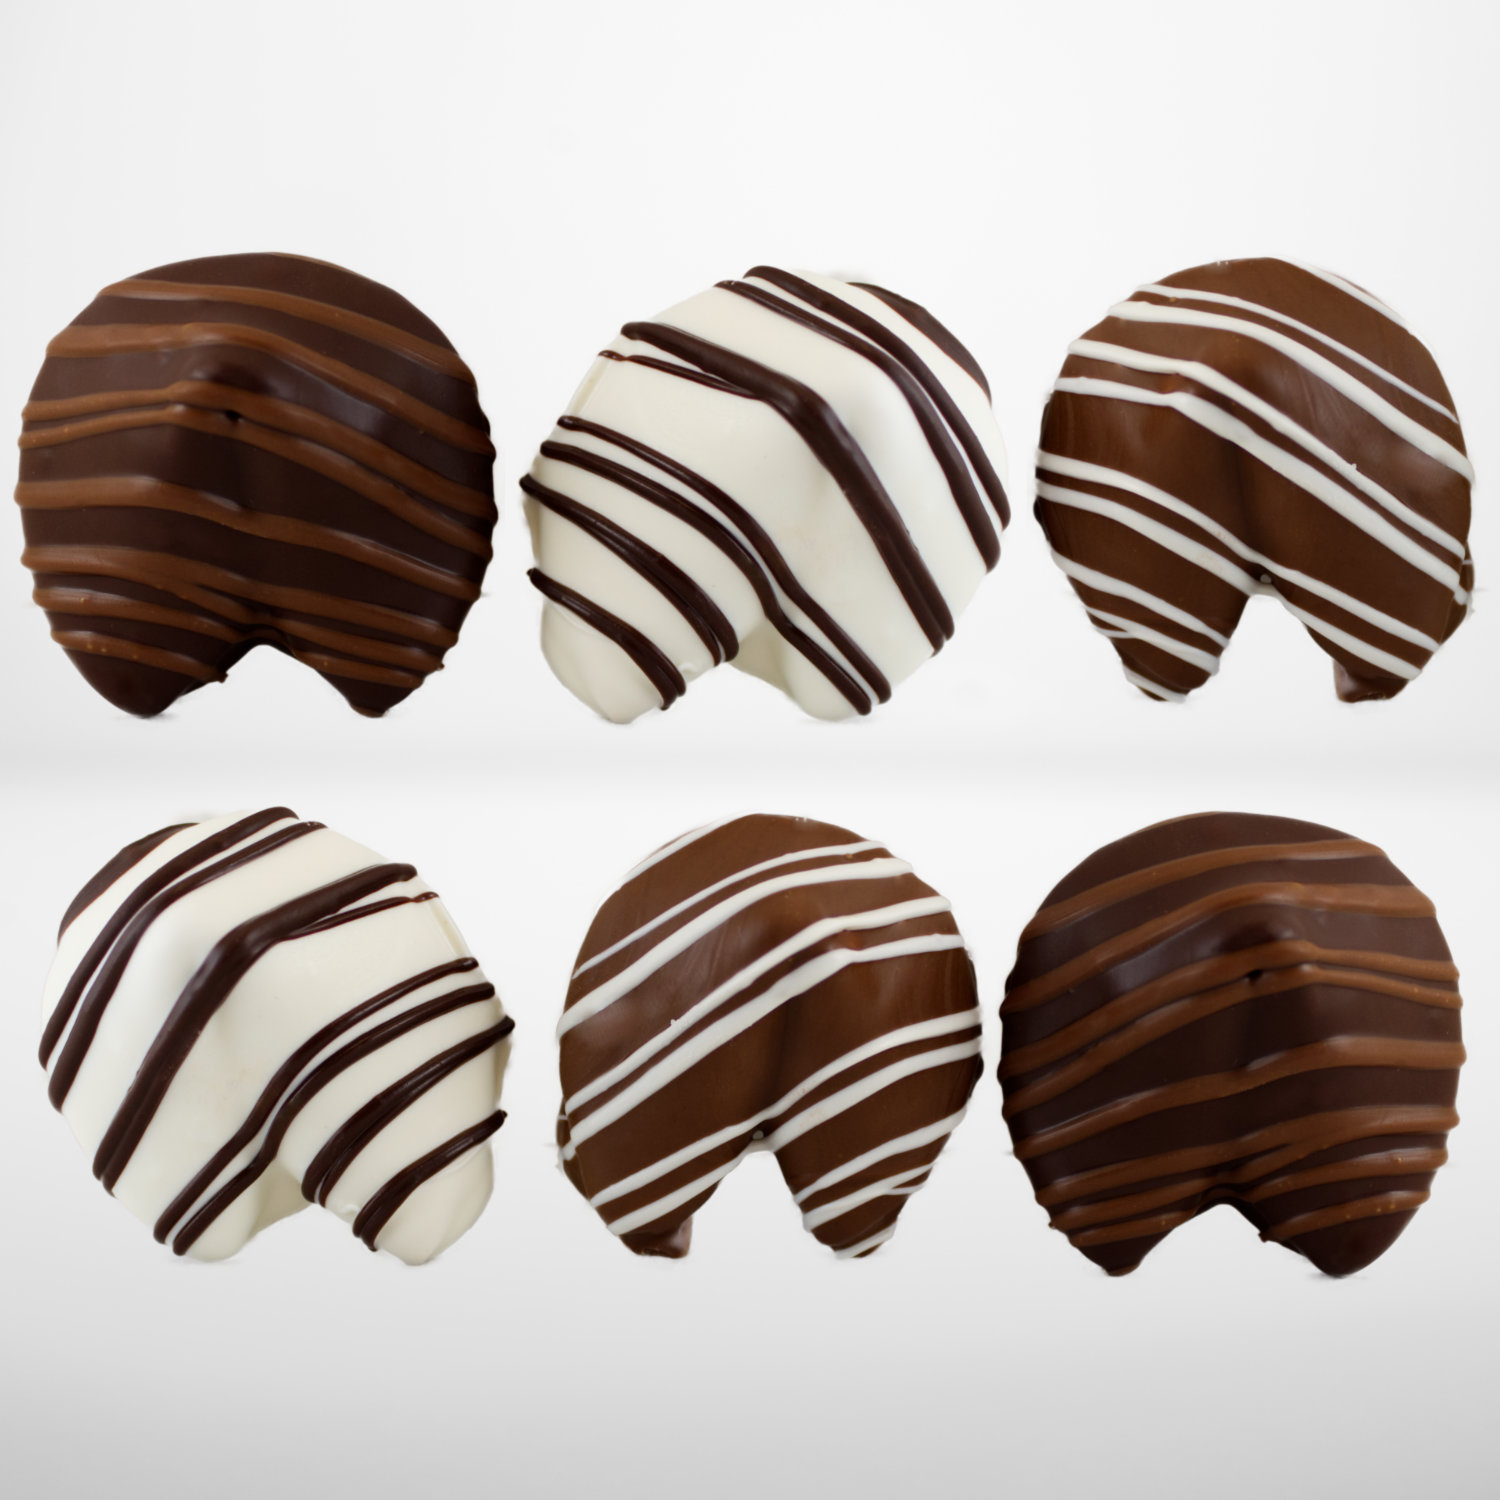 https://bigbearchocolates.com/wp-content/uploads/2019/09/fortune-cookie-drizzled-1.jpg